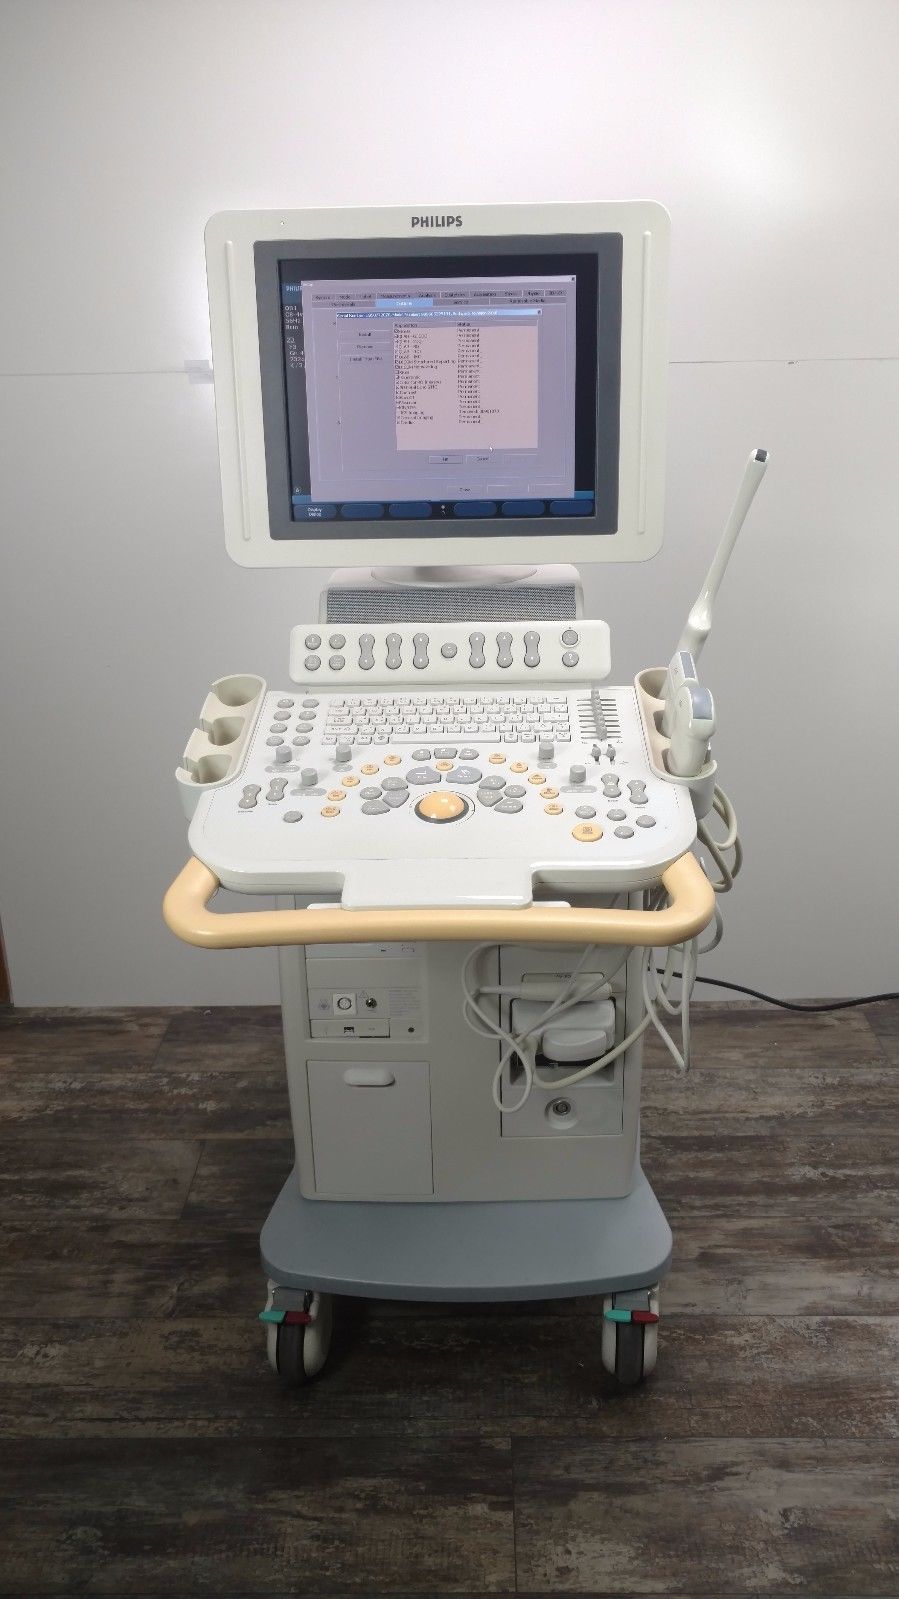 a laptop computer sitting on top of a medical cart